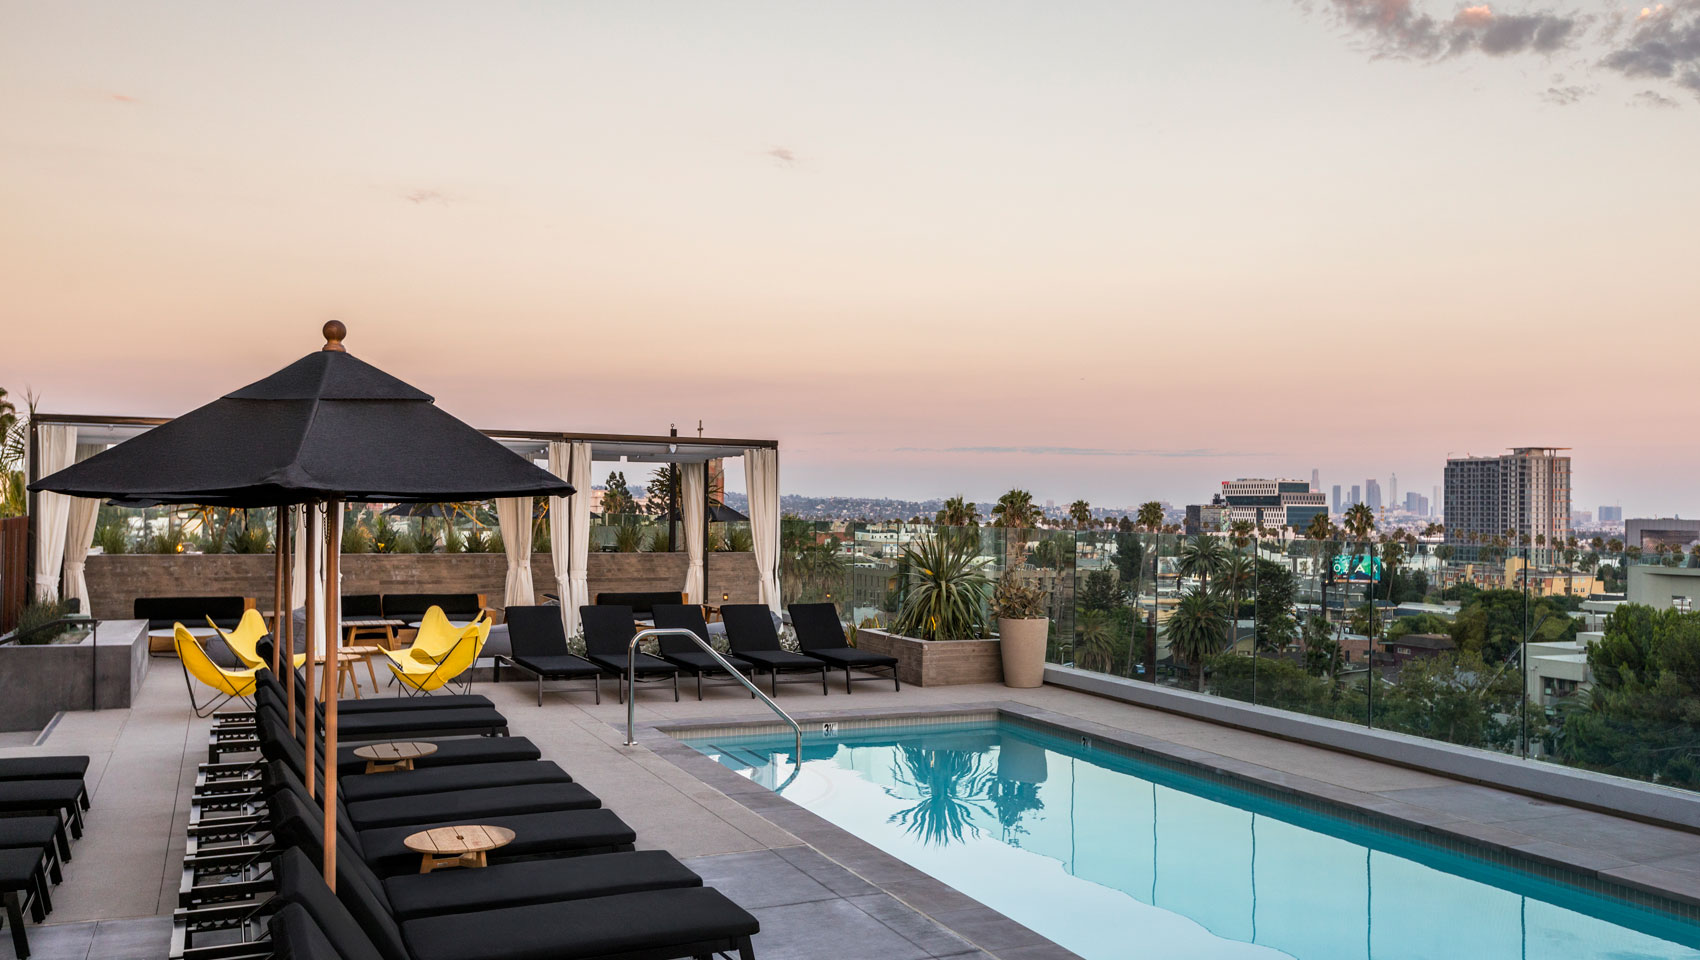 The Kimpton Everly Hotel hollywood rooftop pool lounge